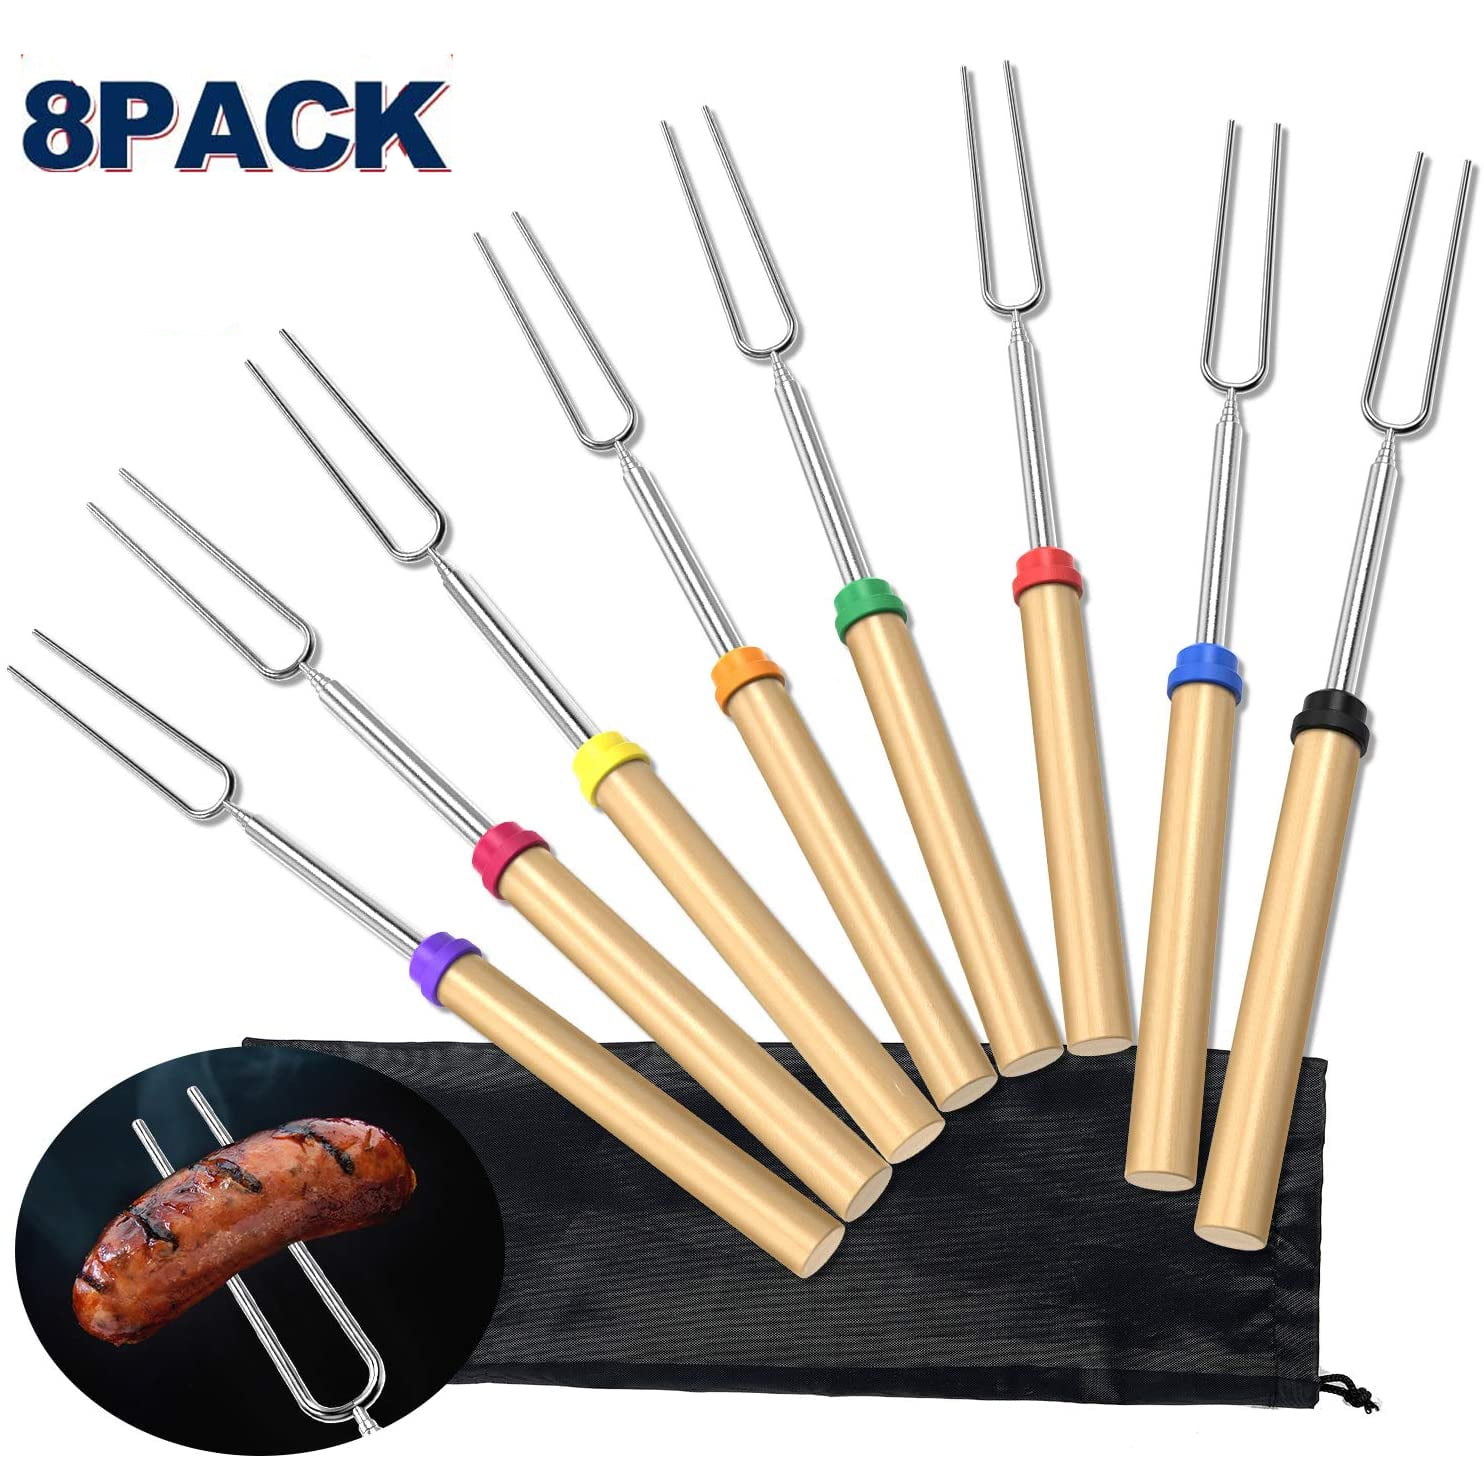 BBQ Telescoping Barbecue Forks Marshmallow Roasting Sticks Skewers 